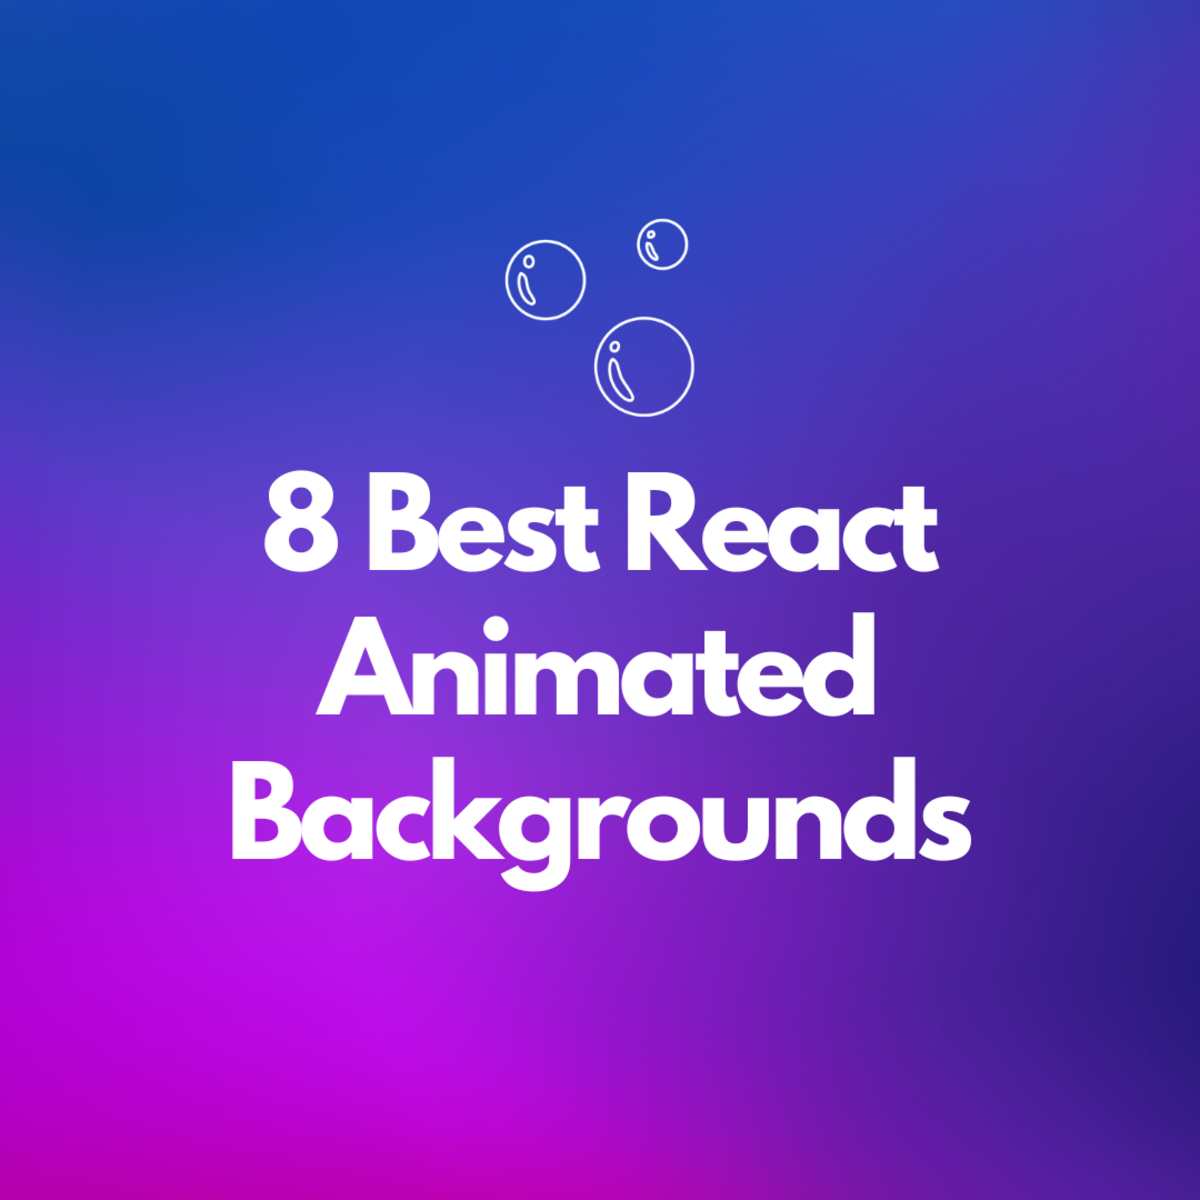 8 Best React Animated Backgrounds to Check Out: The Ultimate List